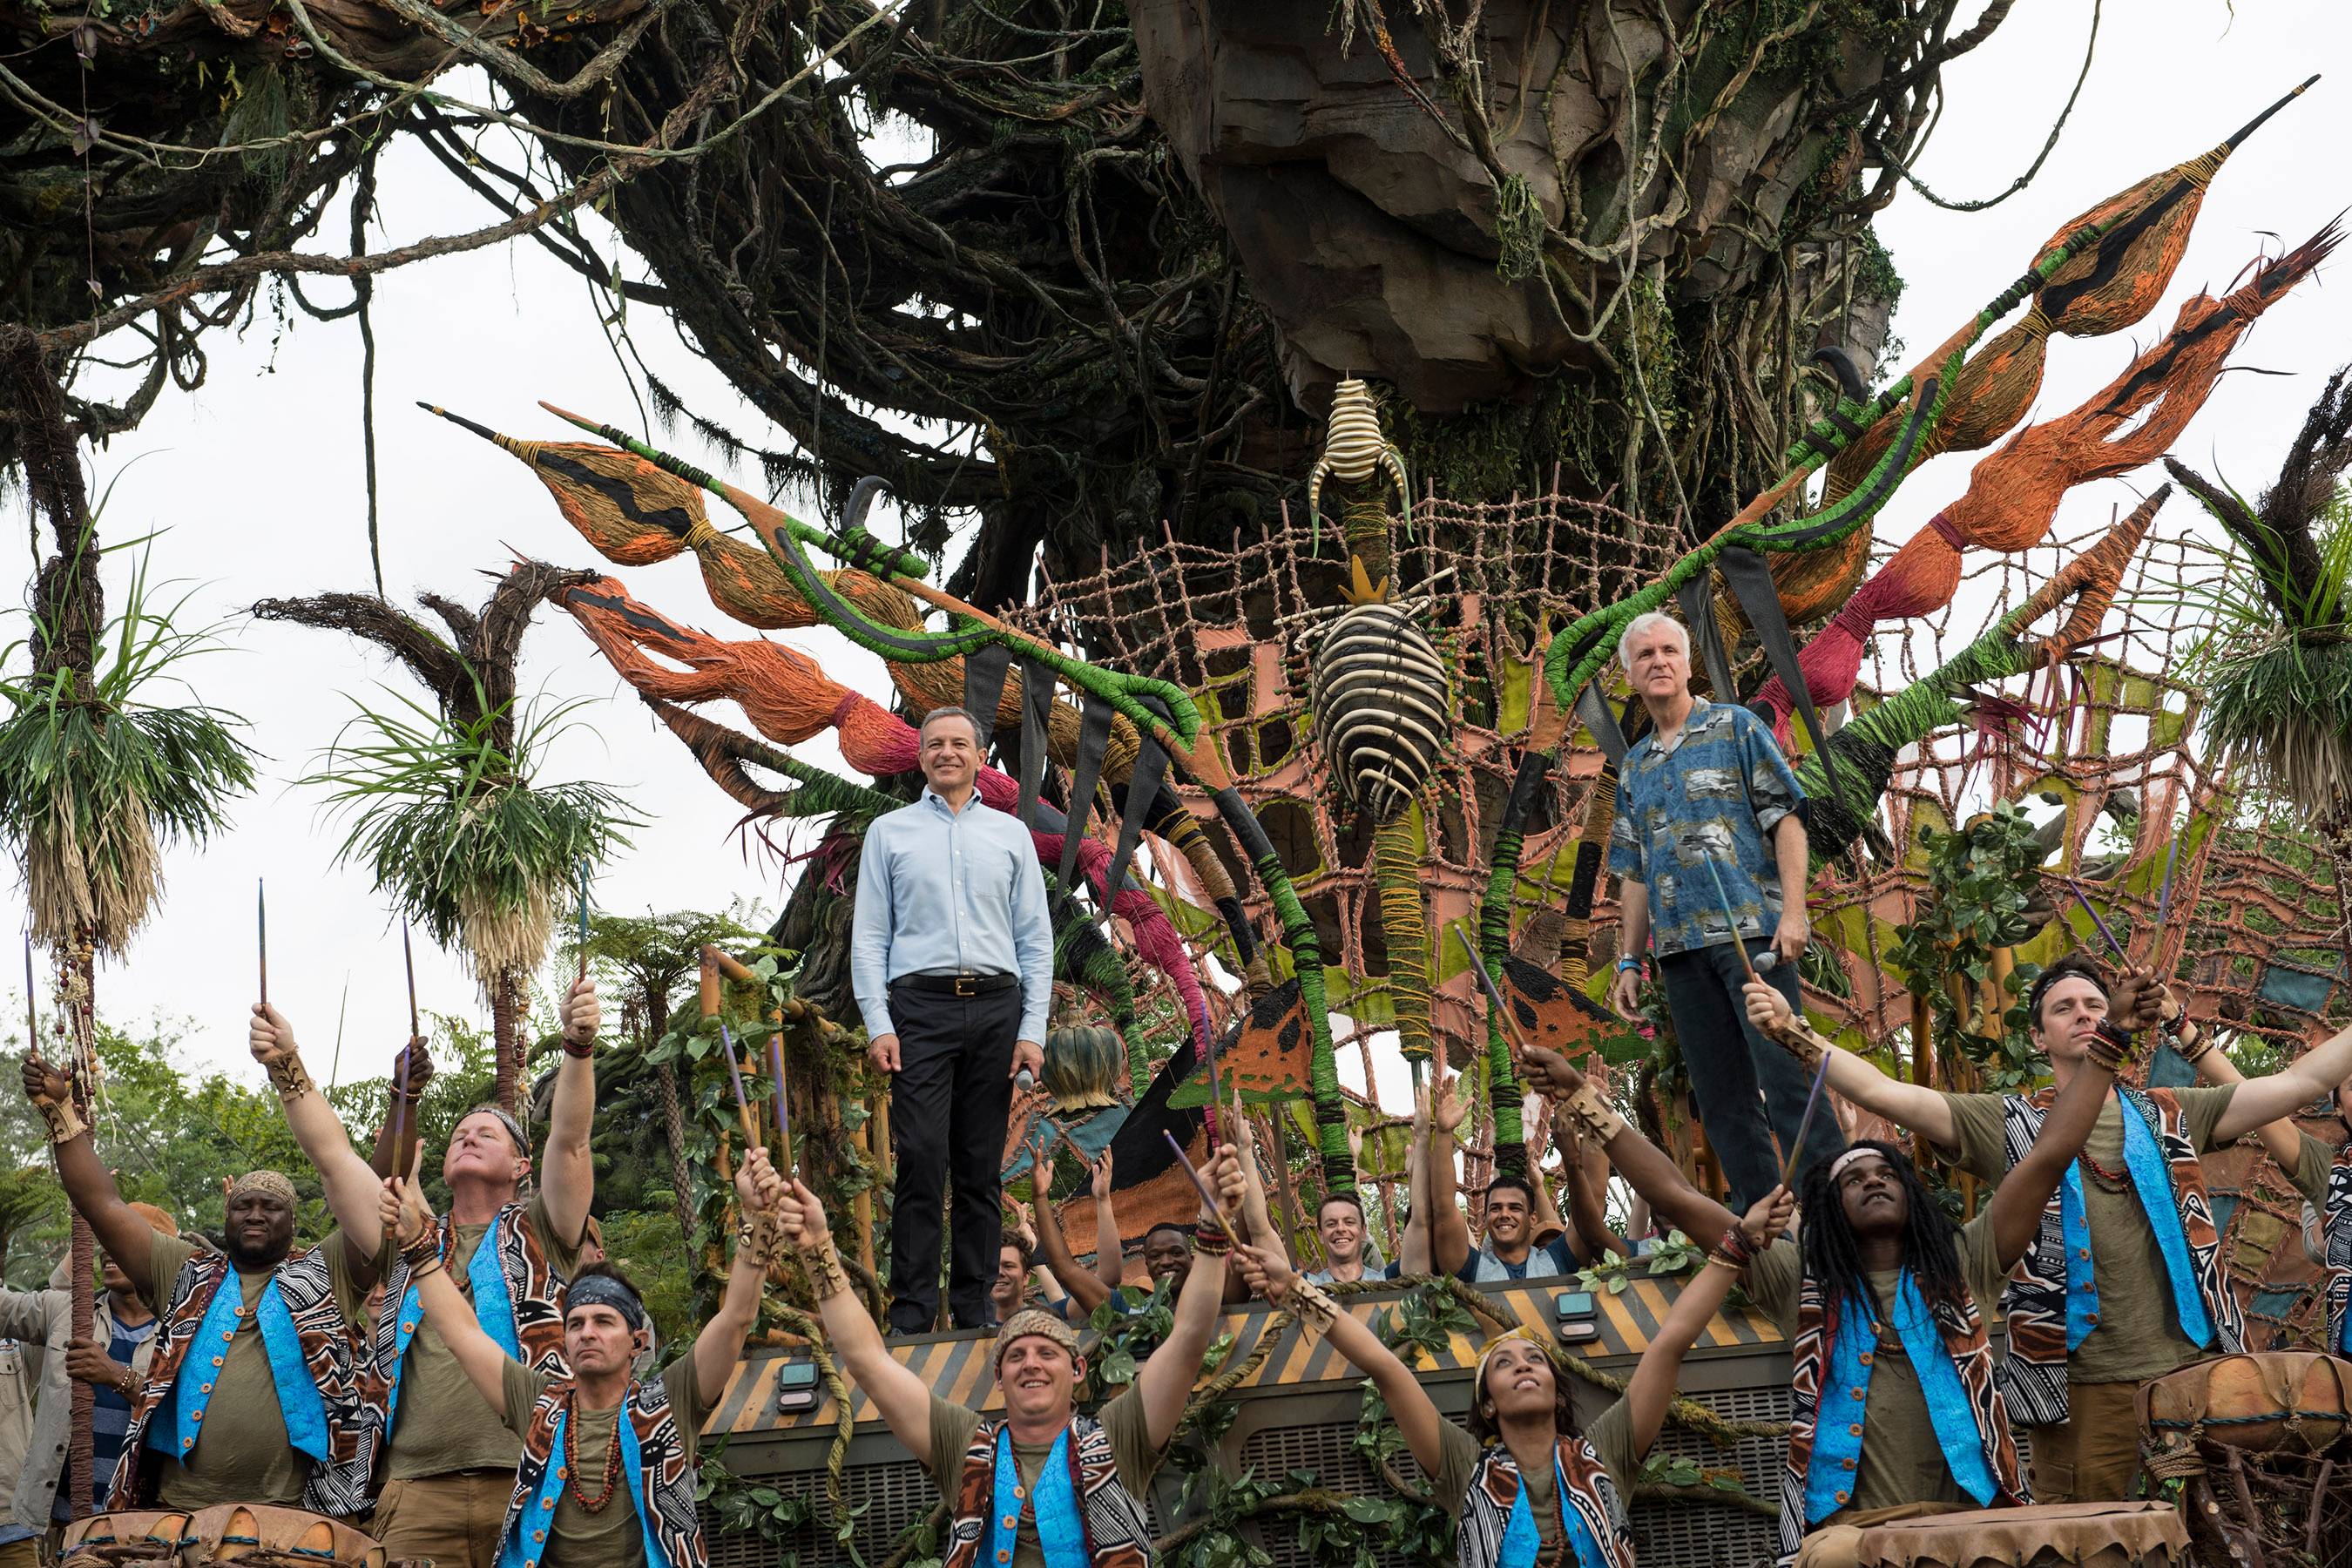 Walt Disney Company Chairman and CEO Bob Iger (left) and filmmaker James Cameron (right) dedicate the new land, Pandora – The World of Avatar